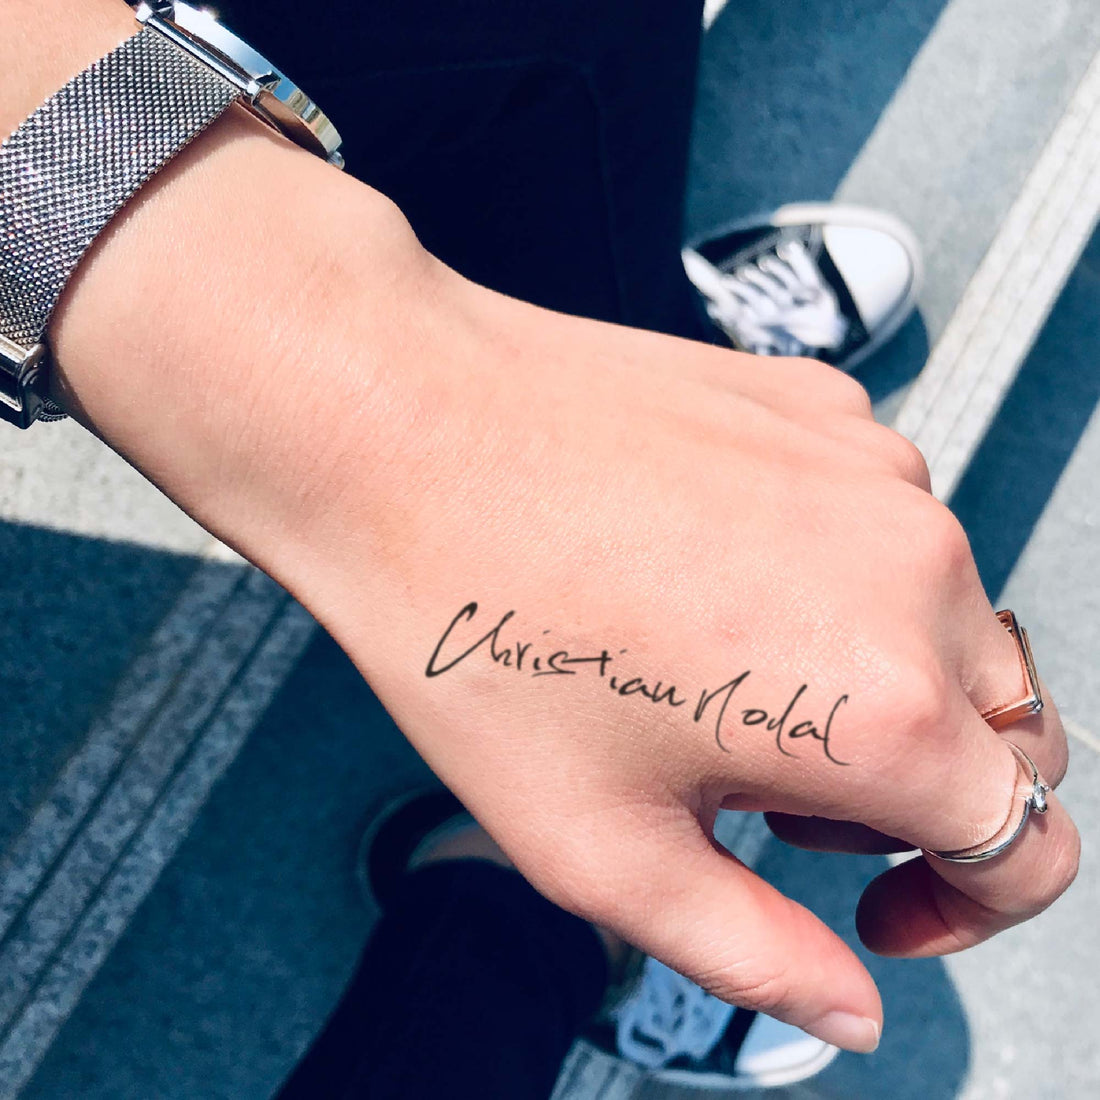 Christian Nodal custom temporary tattoo sticker design idea inspiration meanings removal arm wrist hand words font name signature calligraphy lyrics tour concert outfits merch accessory gift souvenir costumes wear dress up code